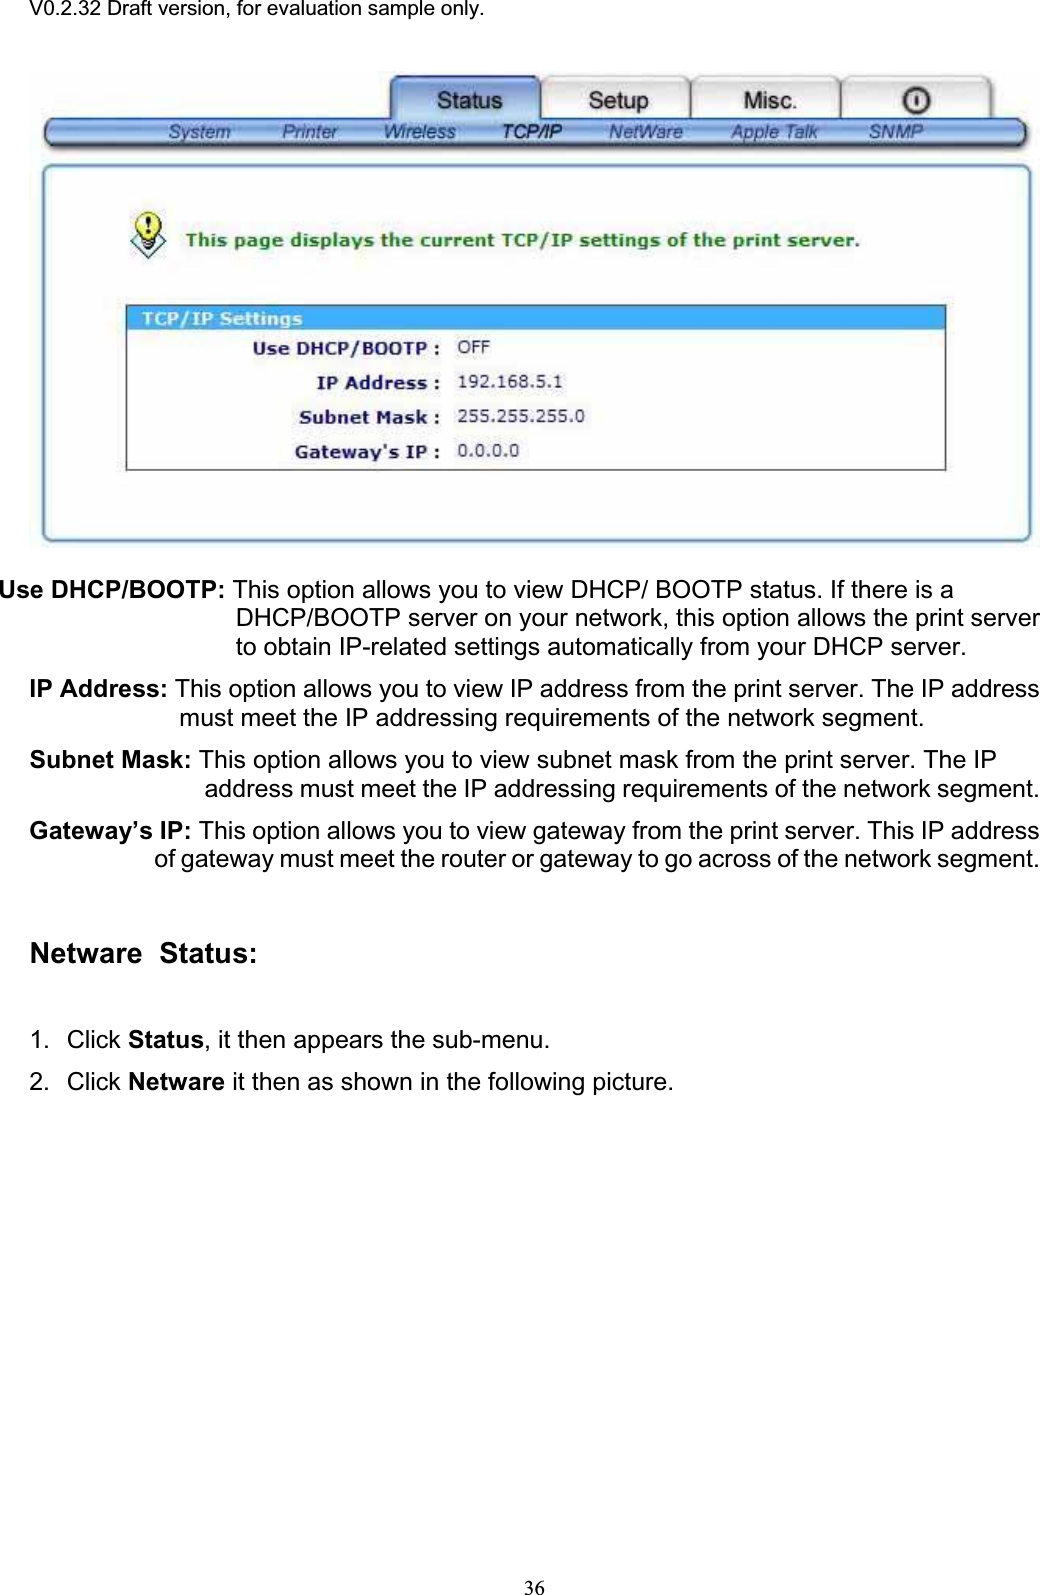 V0.2.32 Draft version, for evaluation sample only.Use DHCP/BOOTP: This option allows you to view DHCP/ BOOTP status. If there is a DHCP/BOOTP server on your network, this option allows the print server to obtain IP-related settings automatically from your DHCP server. IP Address: This option allows you to view IP address from the print server. The IP address must meet the IP addressing requirements of the network segment. Subnet Mask: This option allows you to view subnet mask from the print server. The IP address must meet the IP addressing requirements of the network segment. Gateway’s IP: This option allows you to view gateway from the print server. This IP address of gateway must meet the router or gateway to go across of the network segment. Netware  Status:1. Click Status, it then appears the sub-menu. 2. Click Netware it then as shown in the following picture. 36